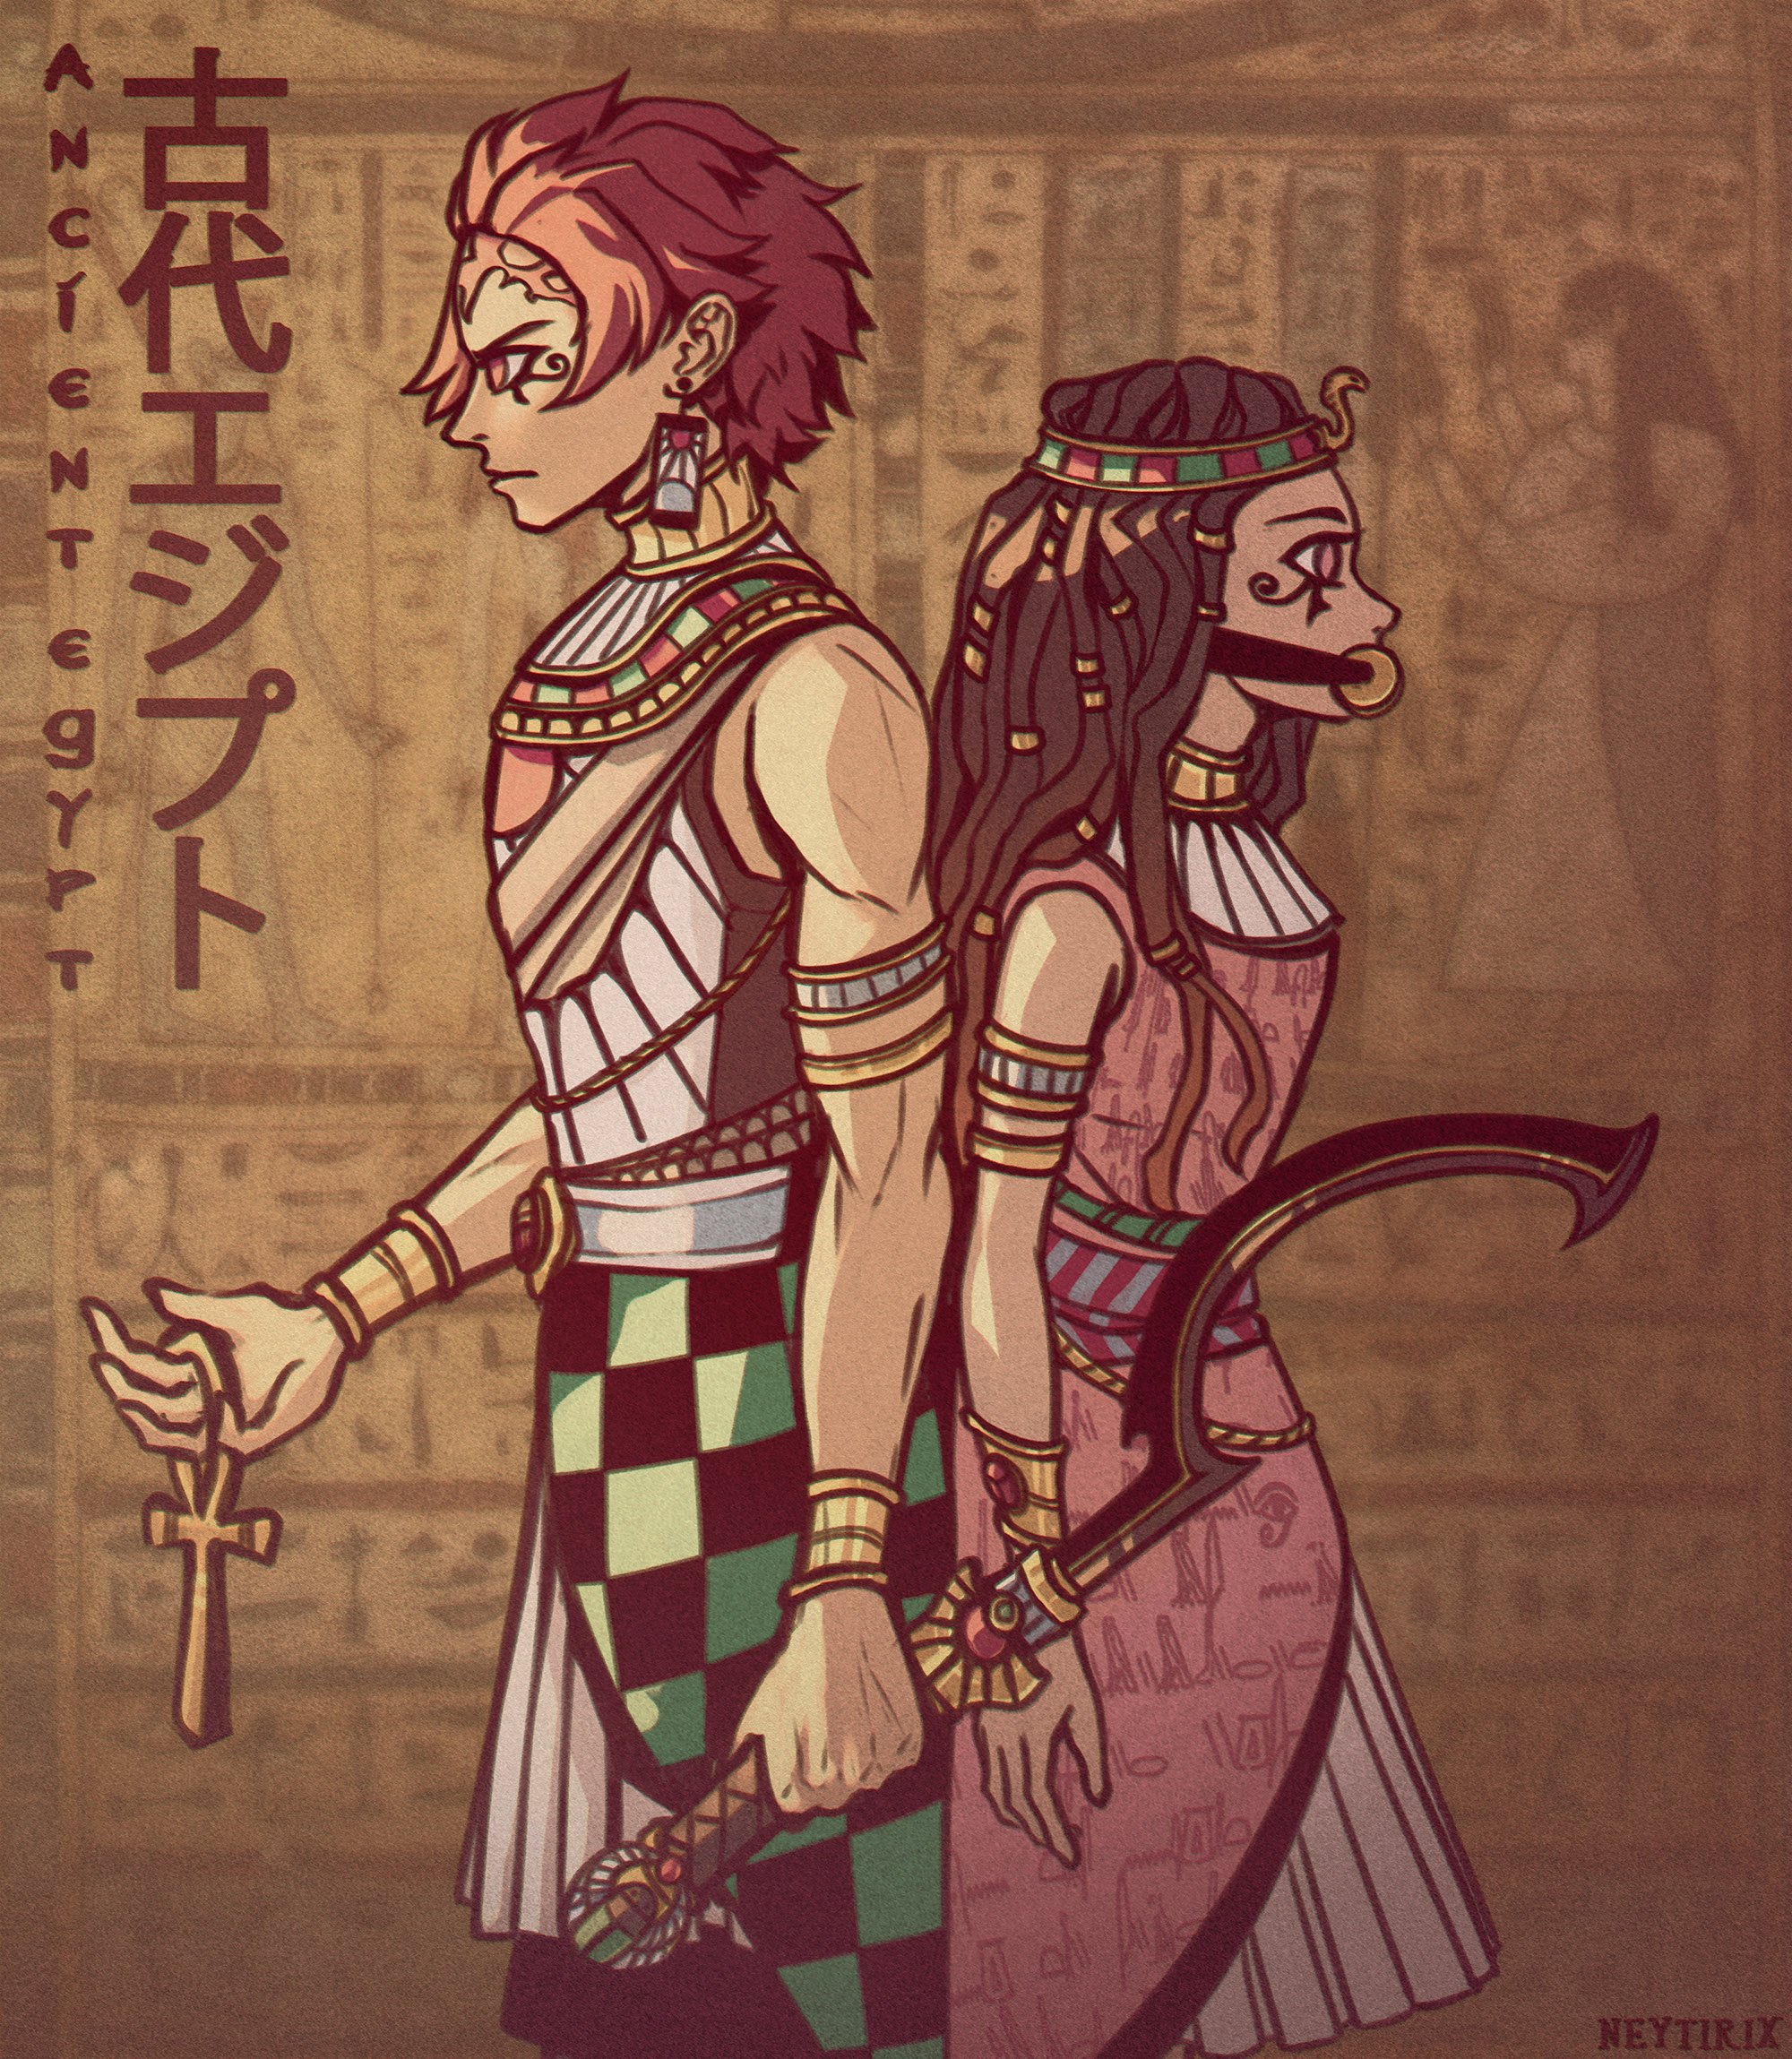 Third, is Nezuko and Tanjiro as characters from the Wild West. 